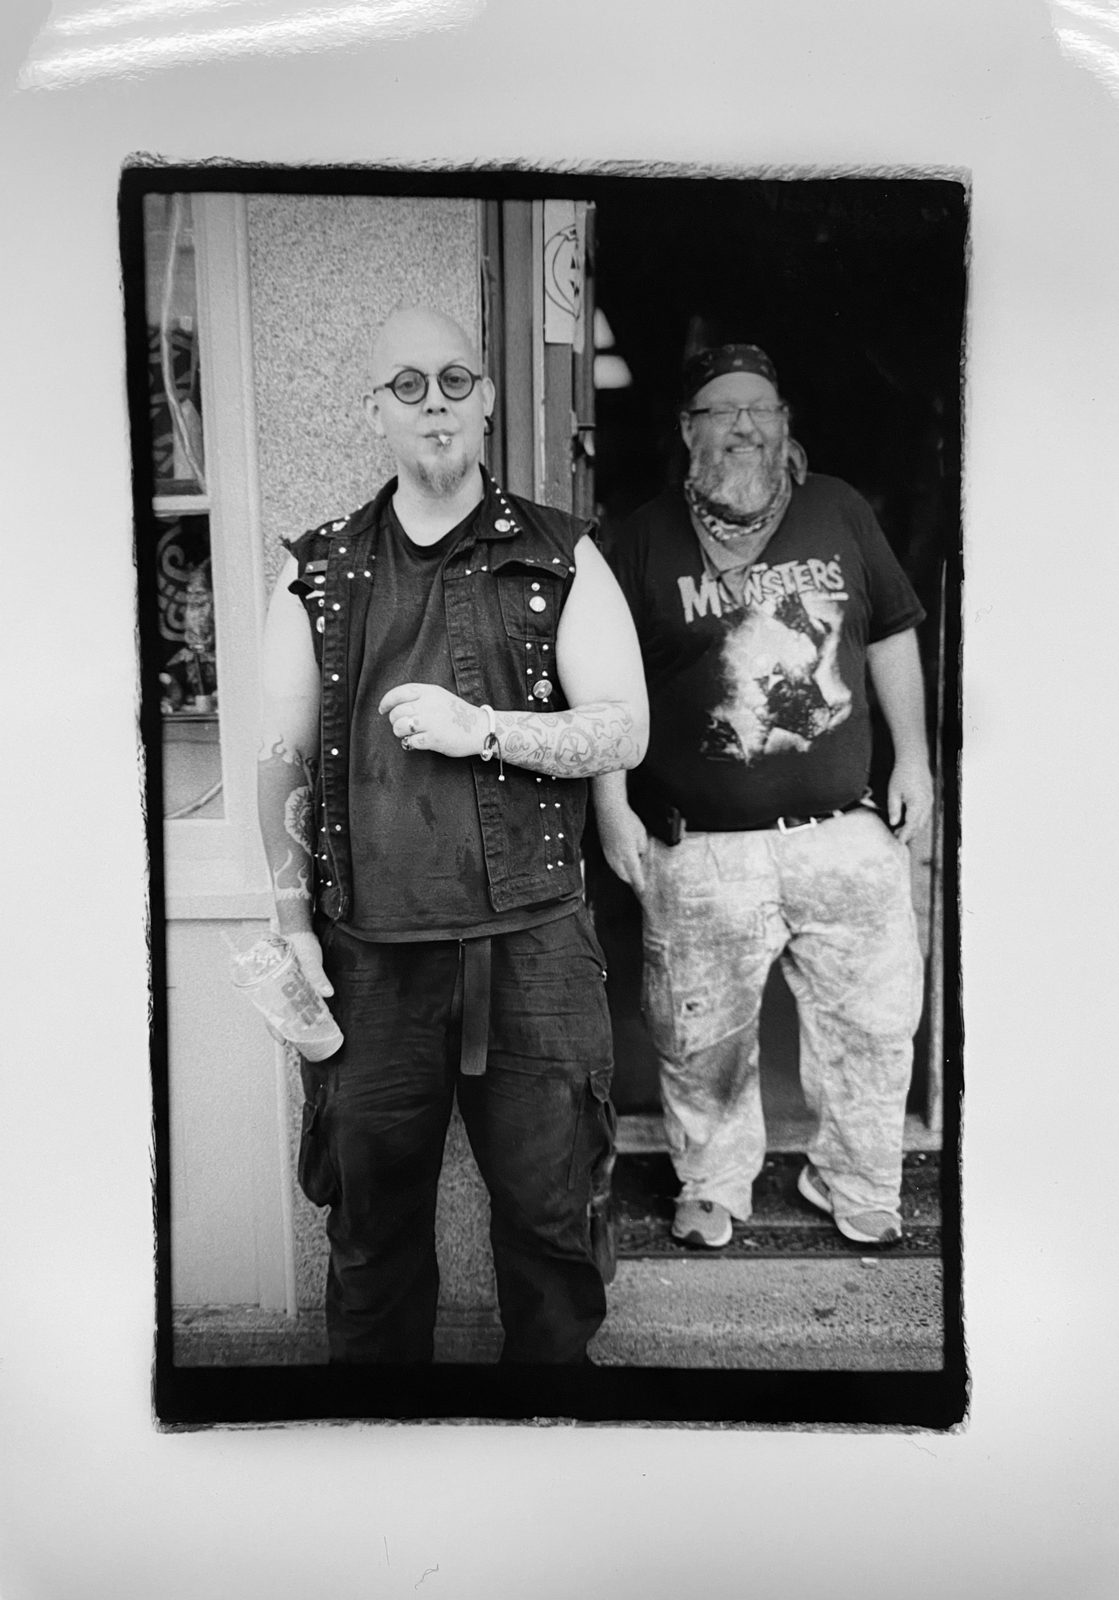 “bouncers”-door-men shot on ILFORD HP5 plus film by Jessica Martineau